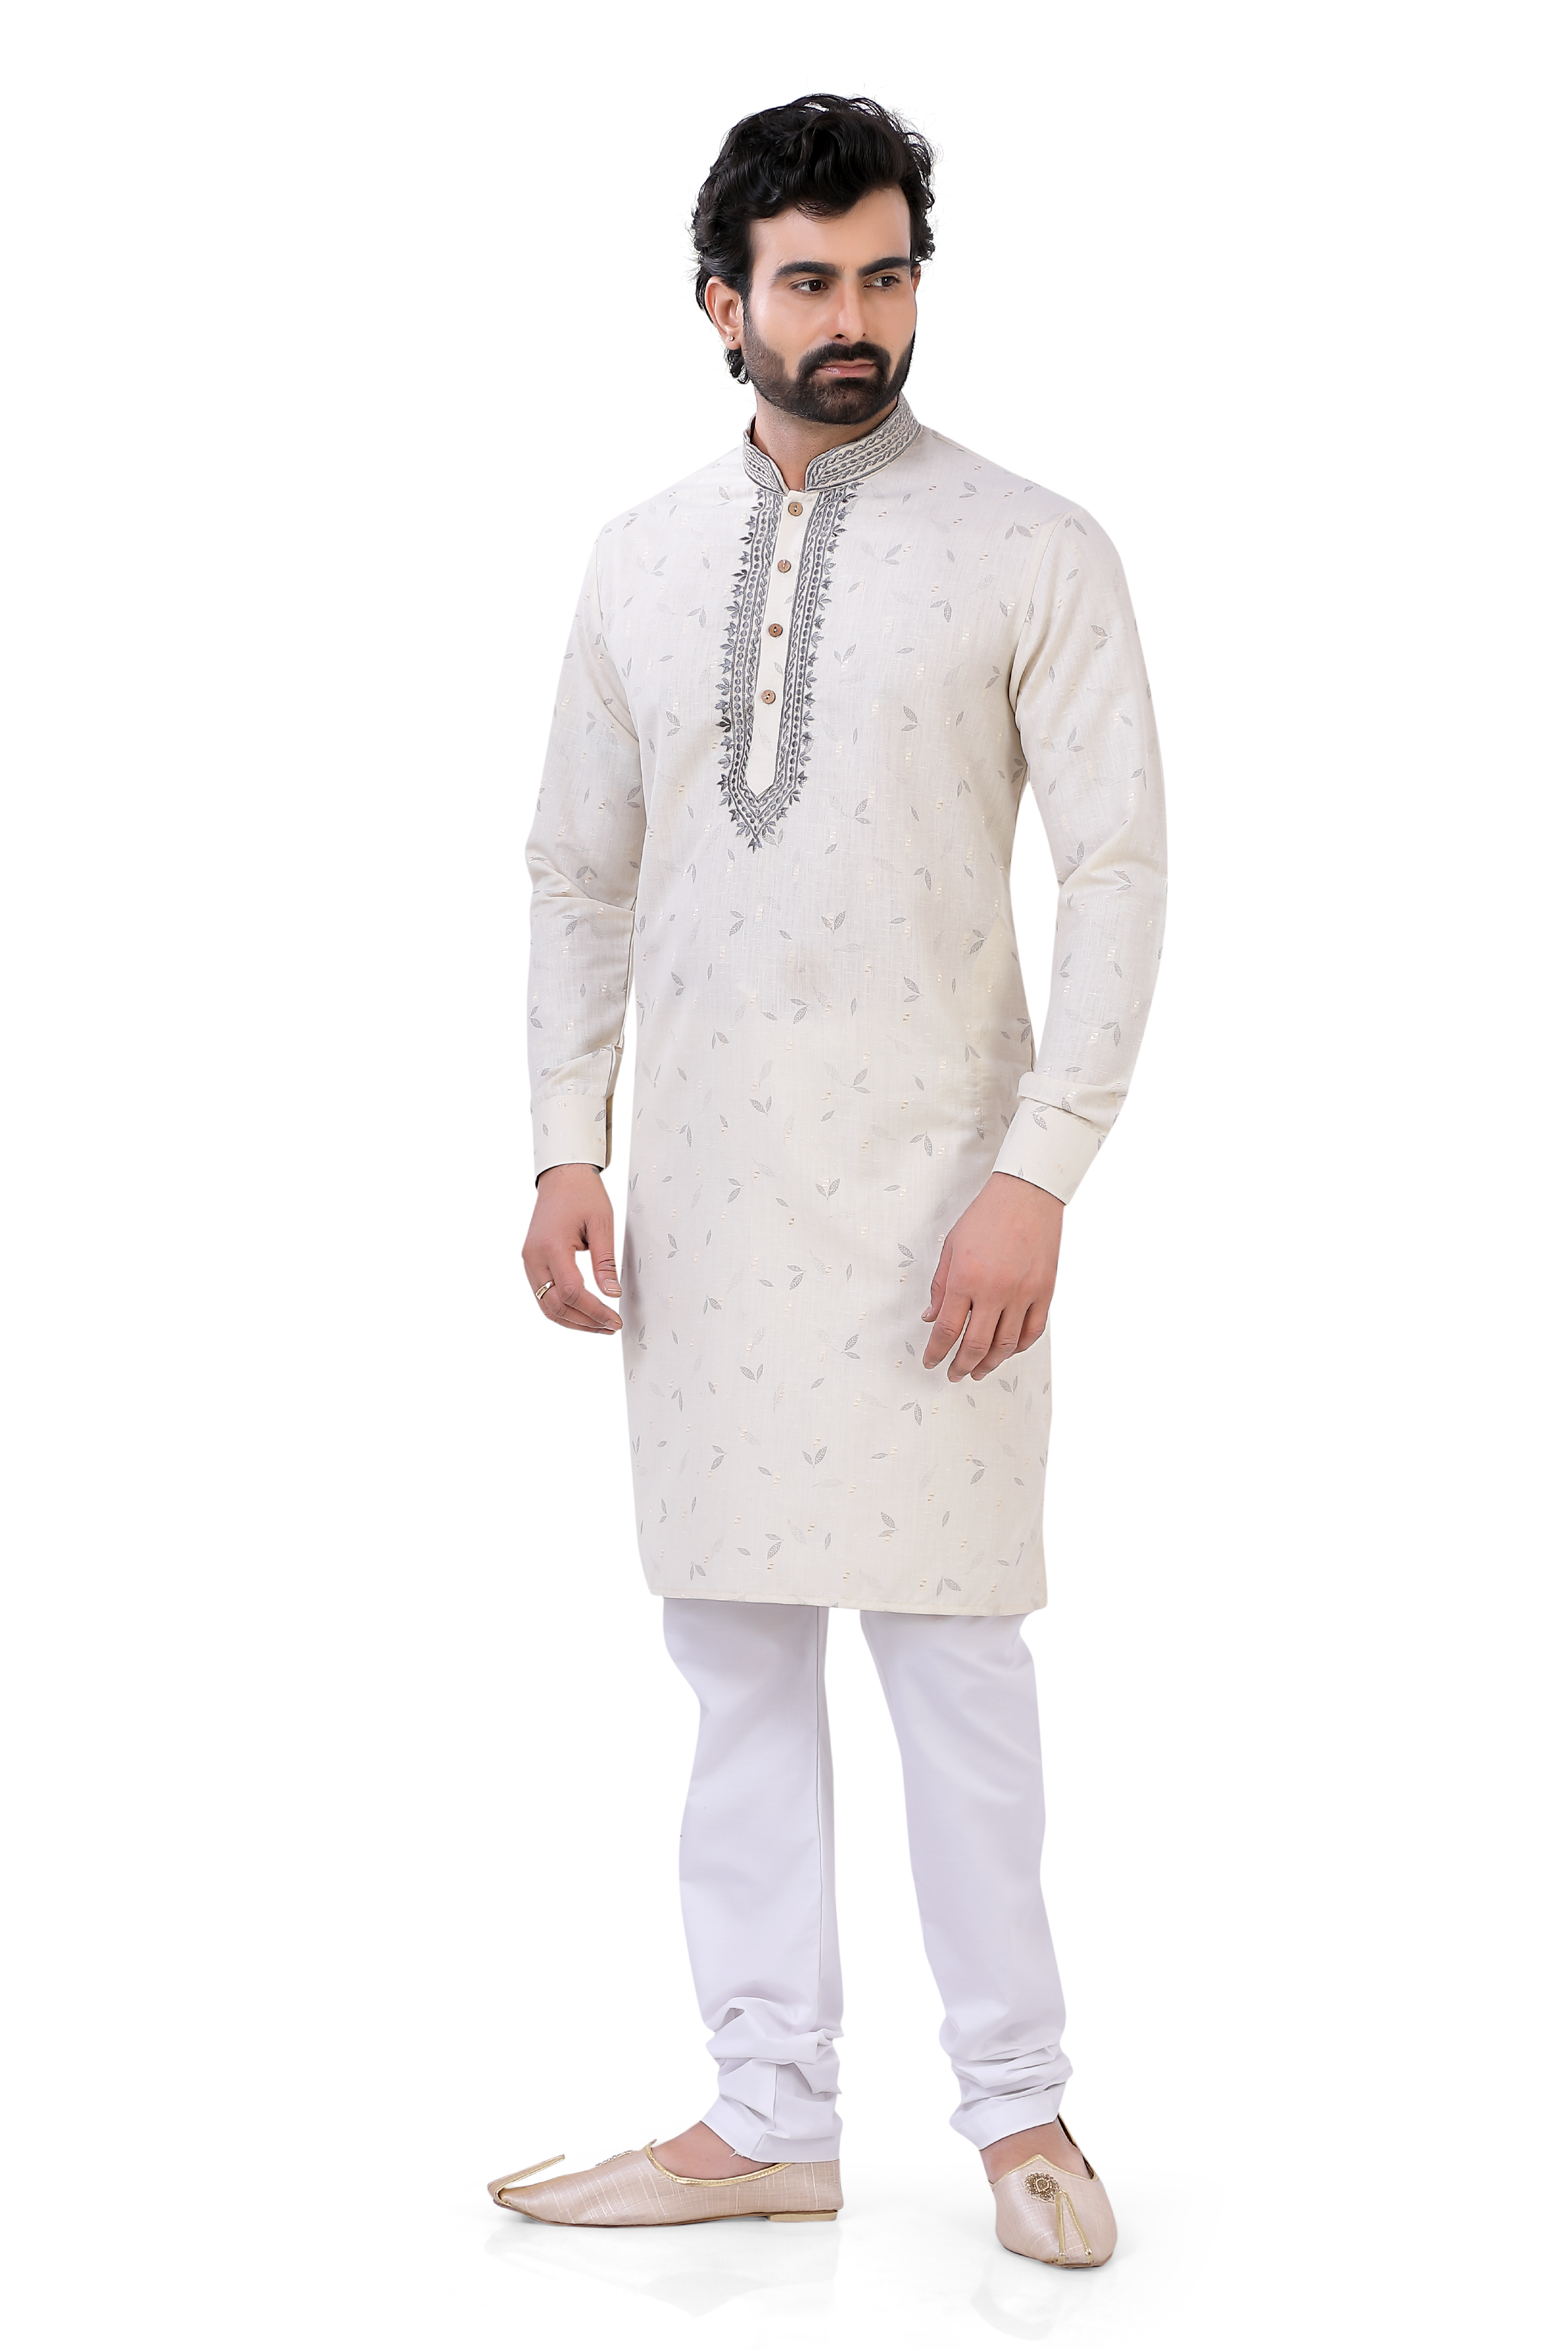 Printed cotton Kurta and Pajama in Cream with embroidery